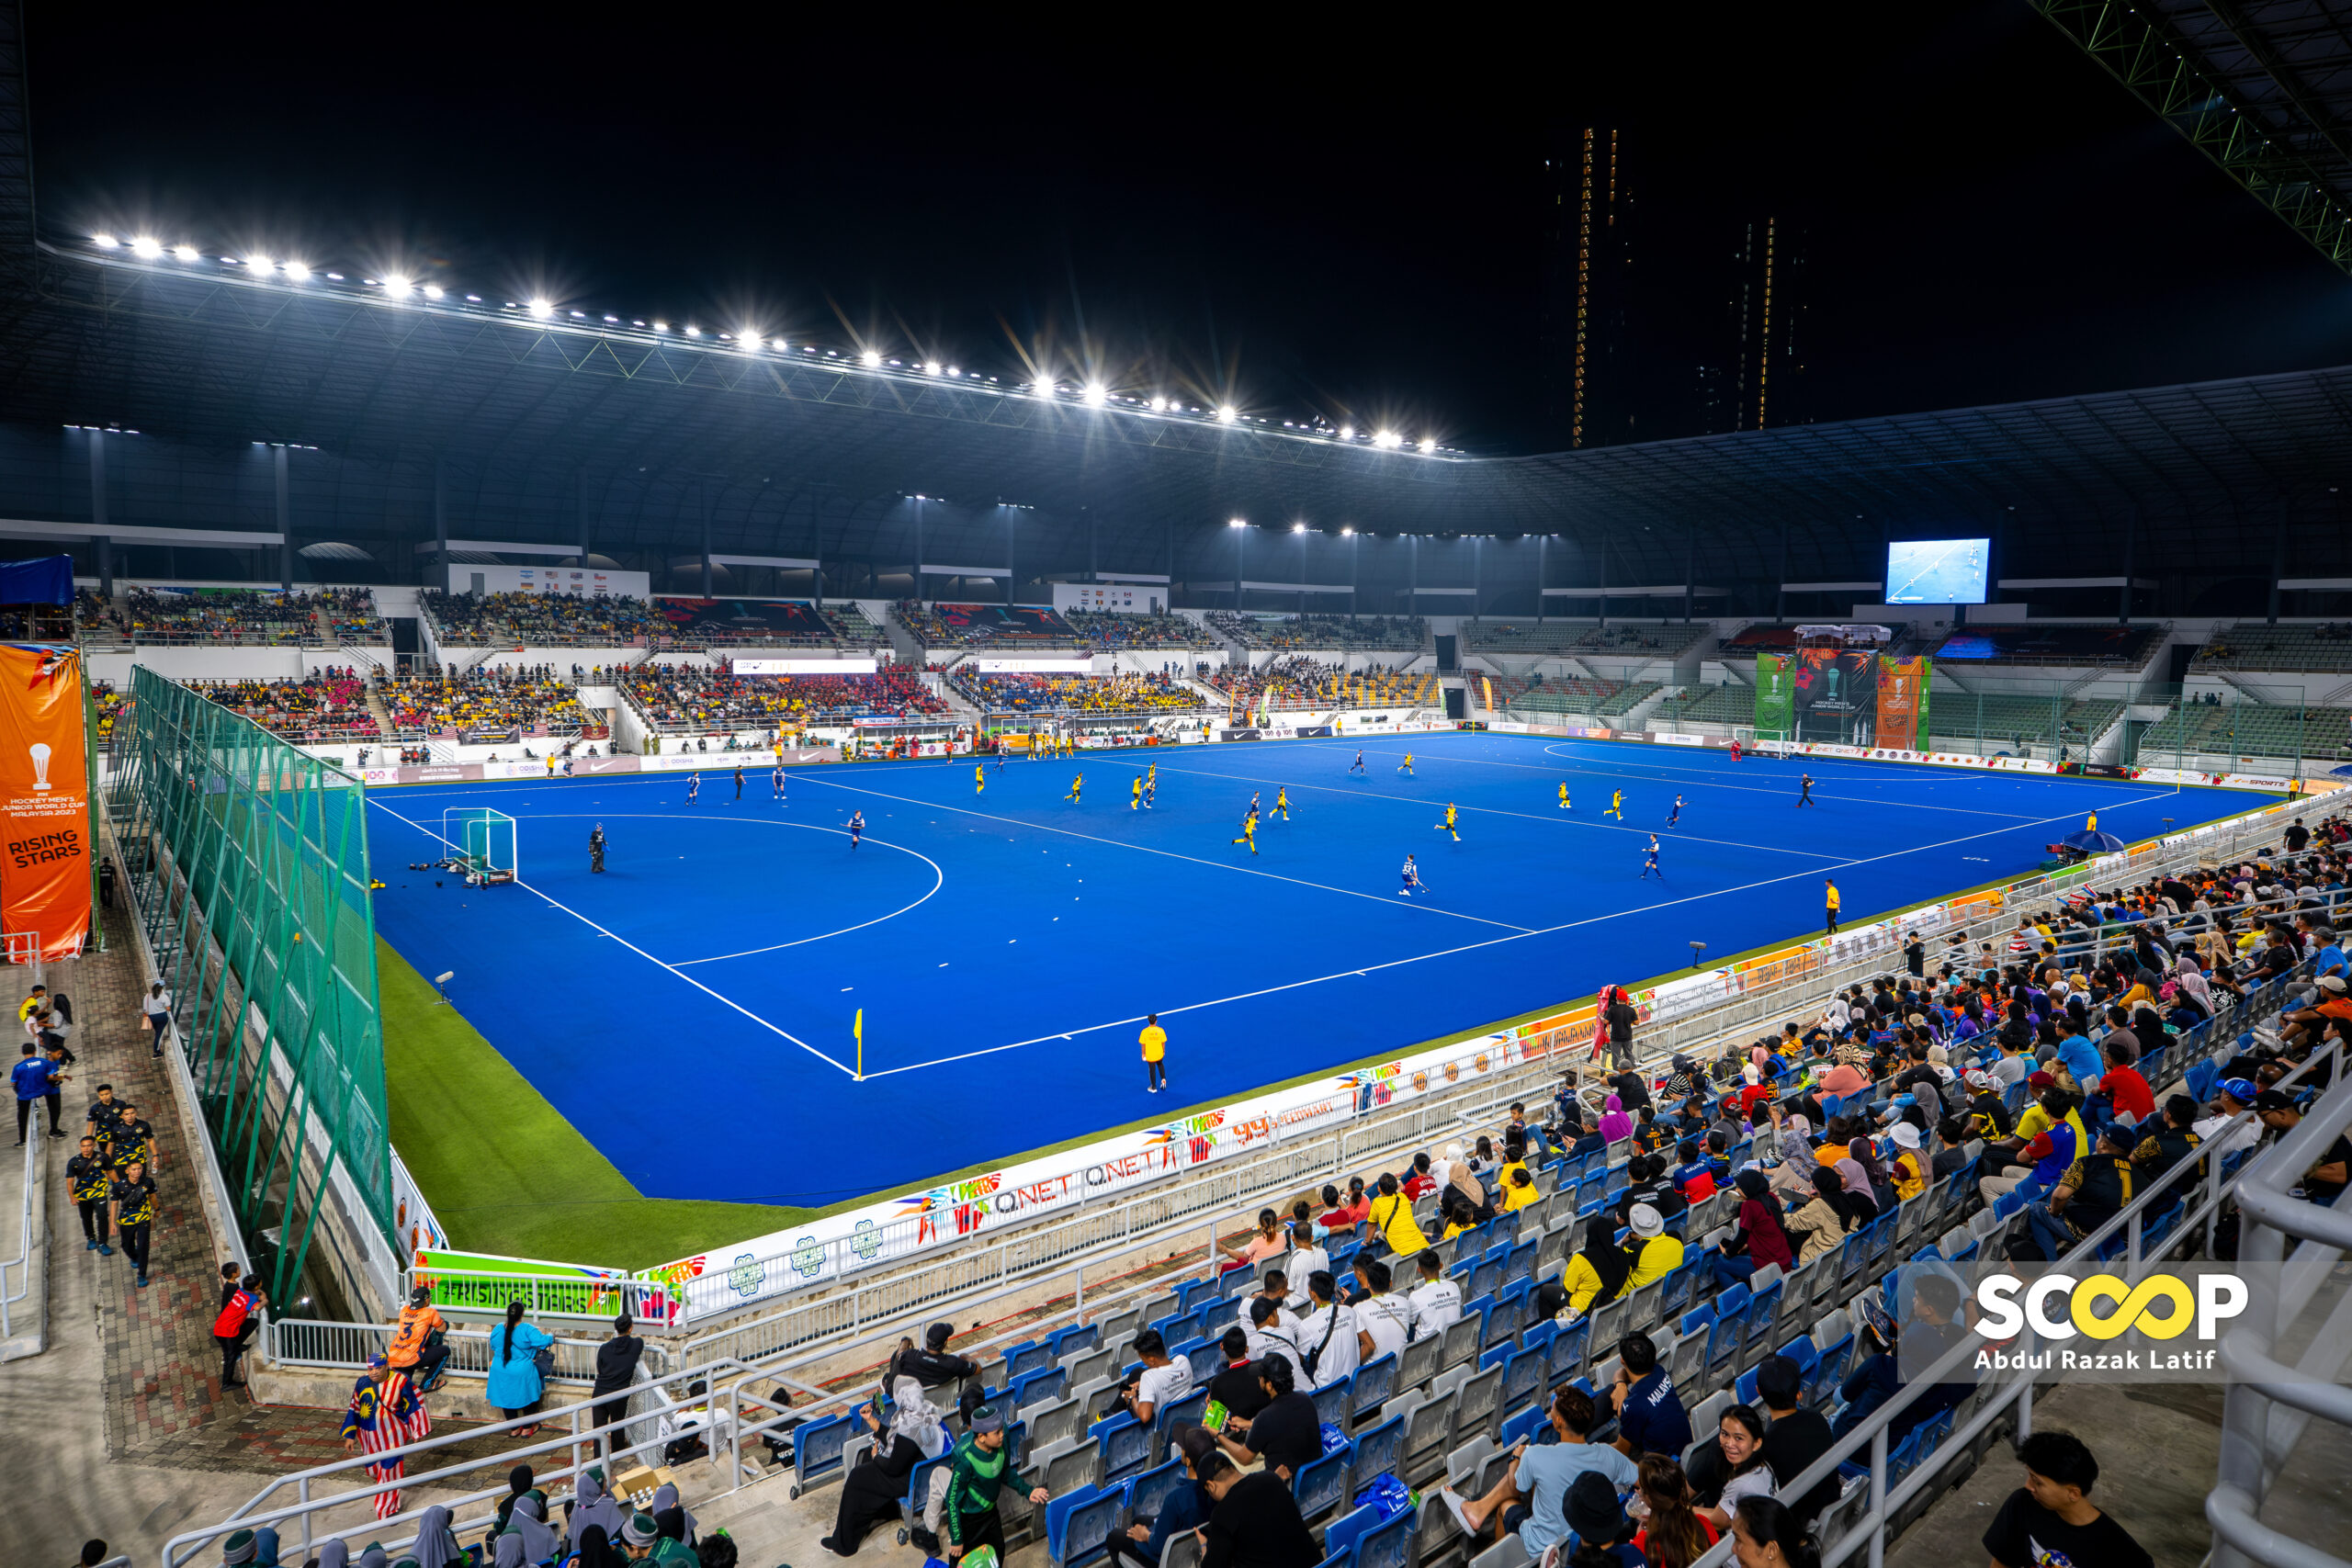 MHC vows comprehensive talent scouting beyond the Malaysia Hockey League